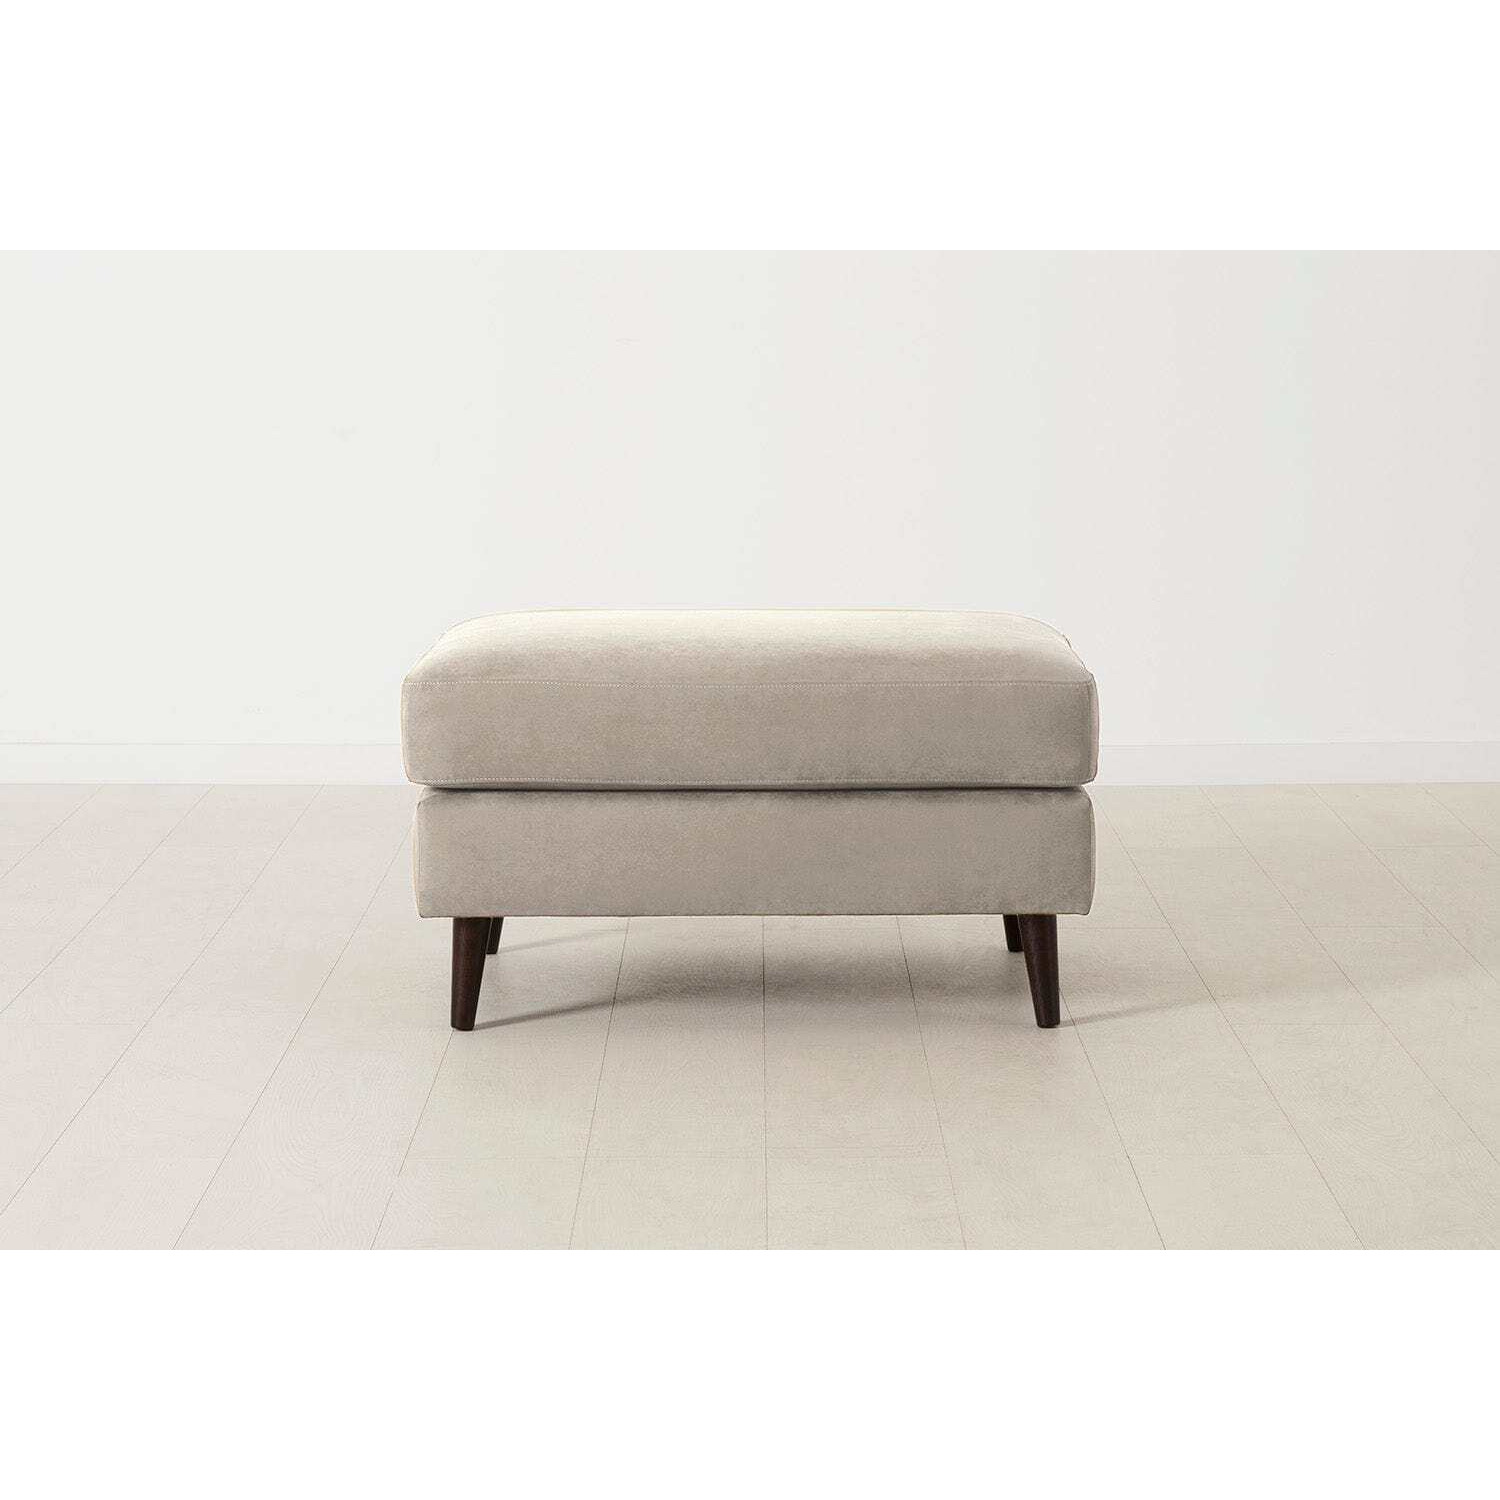 Model 10 Ottoman From Swyft - Alabaster - Quick Delivery